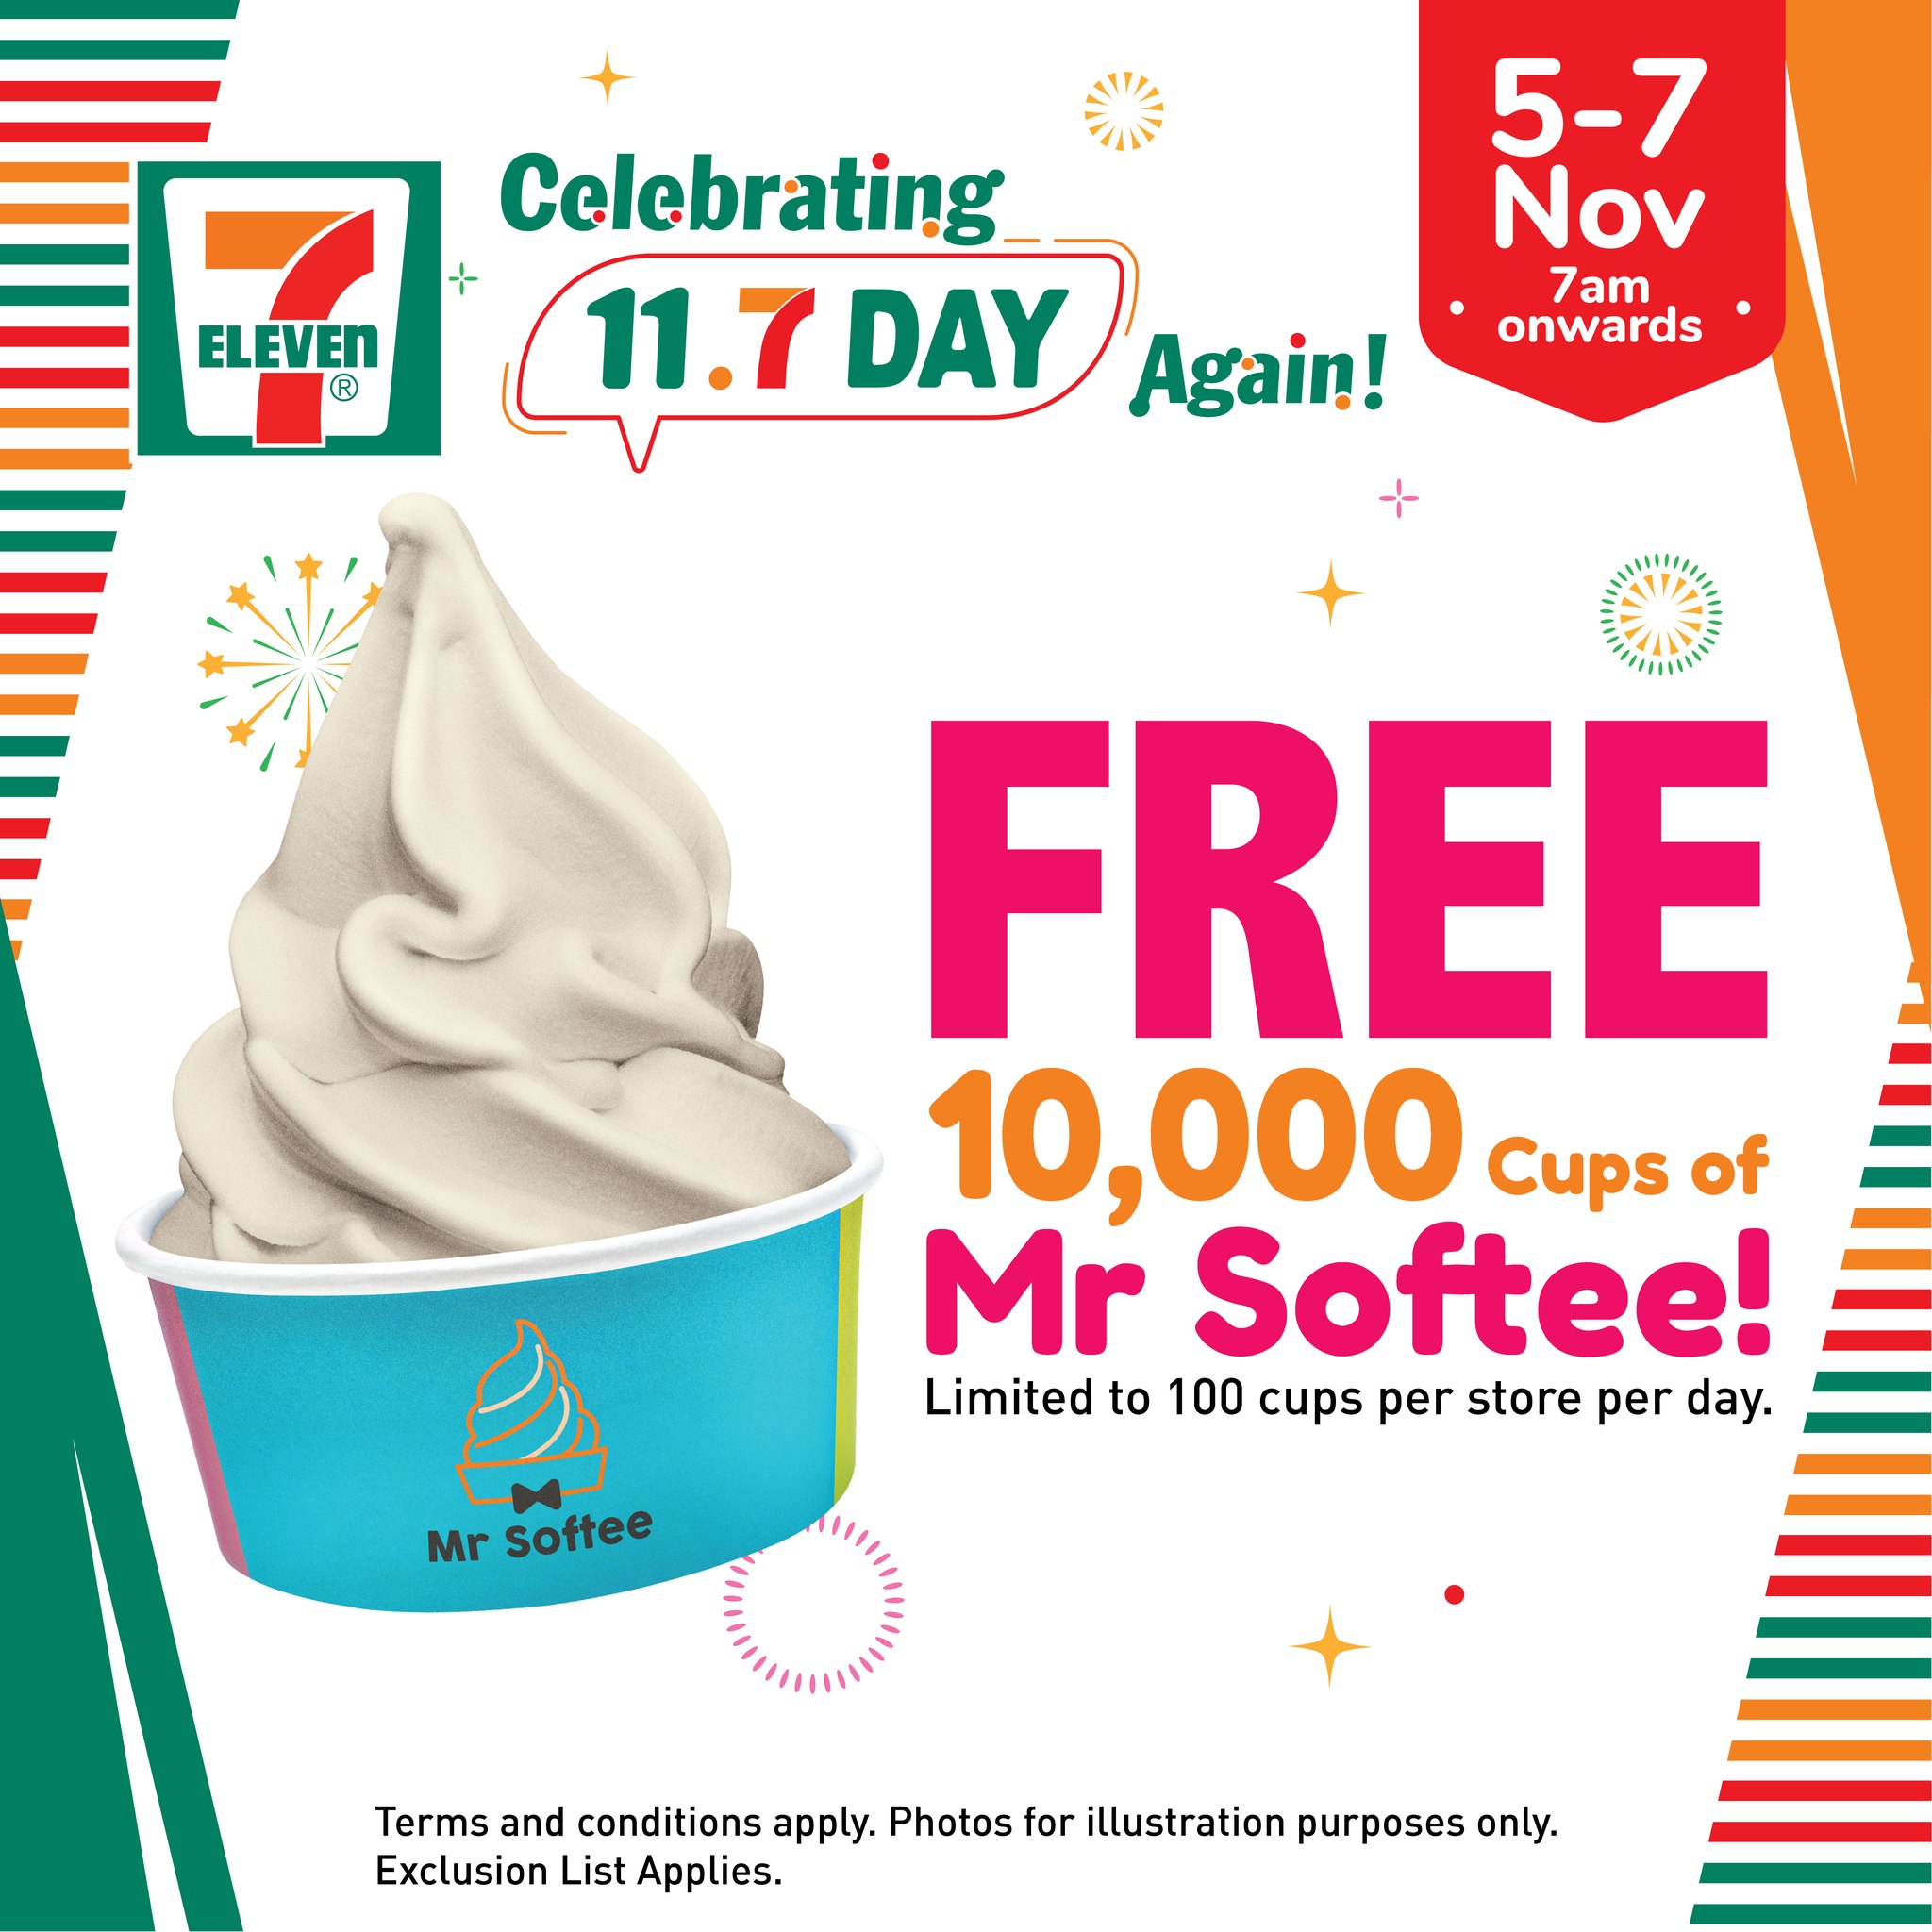 Lobang: 7-Eleven S'pore celebrates "11.7 Day" with FREE Mr Softee & 20% OFF Storewide promotions from 5 - 7 November 2022 - 5